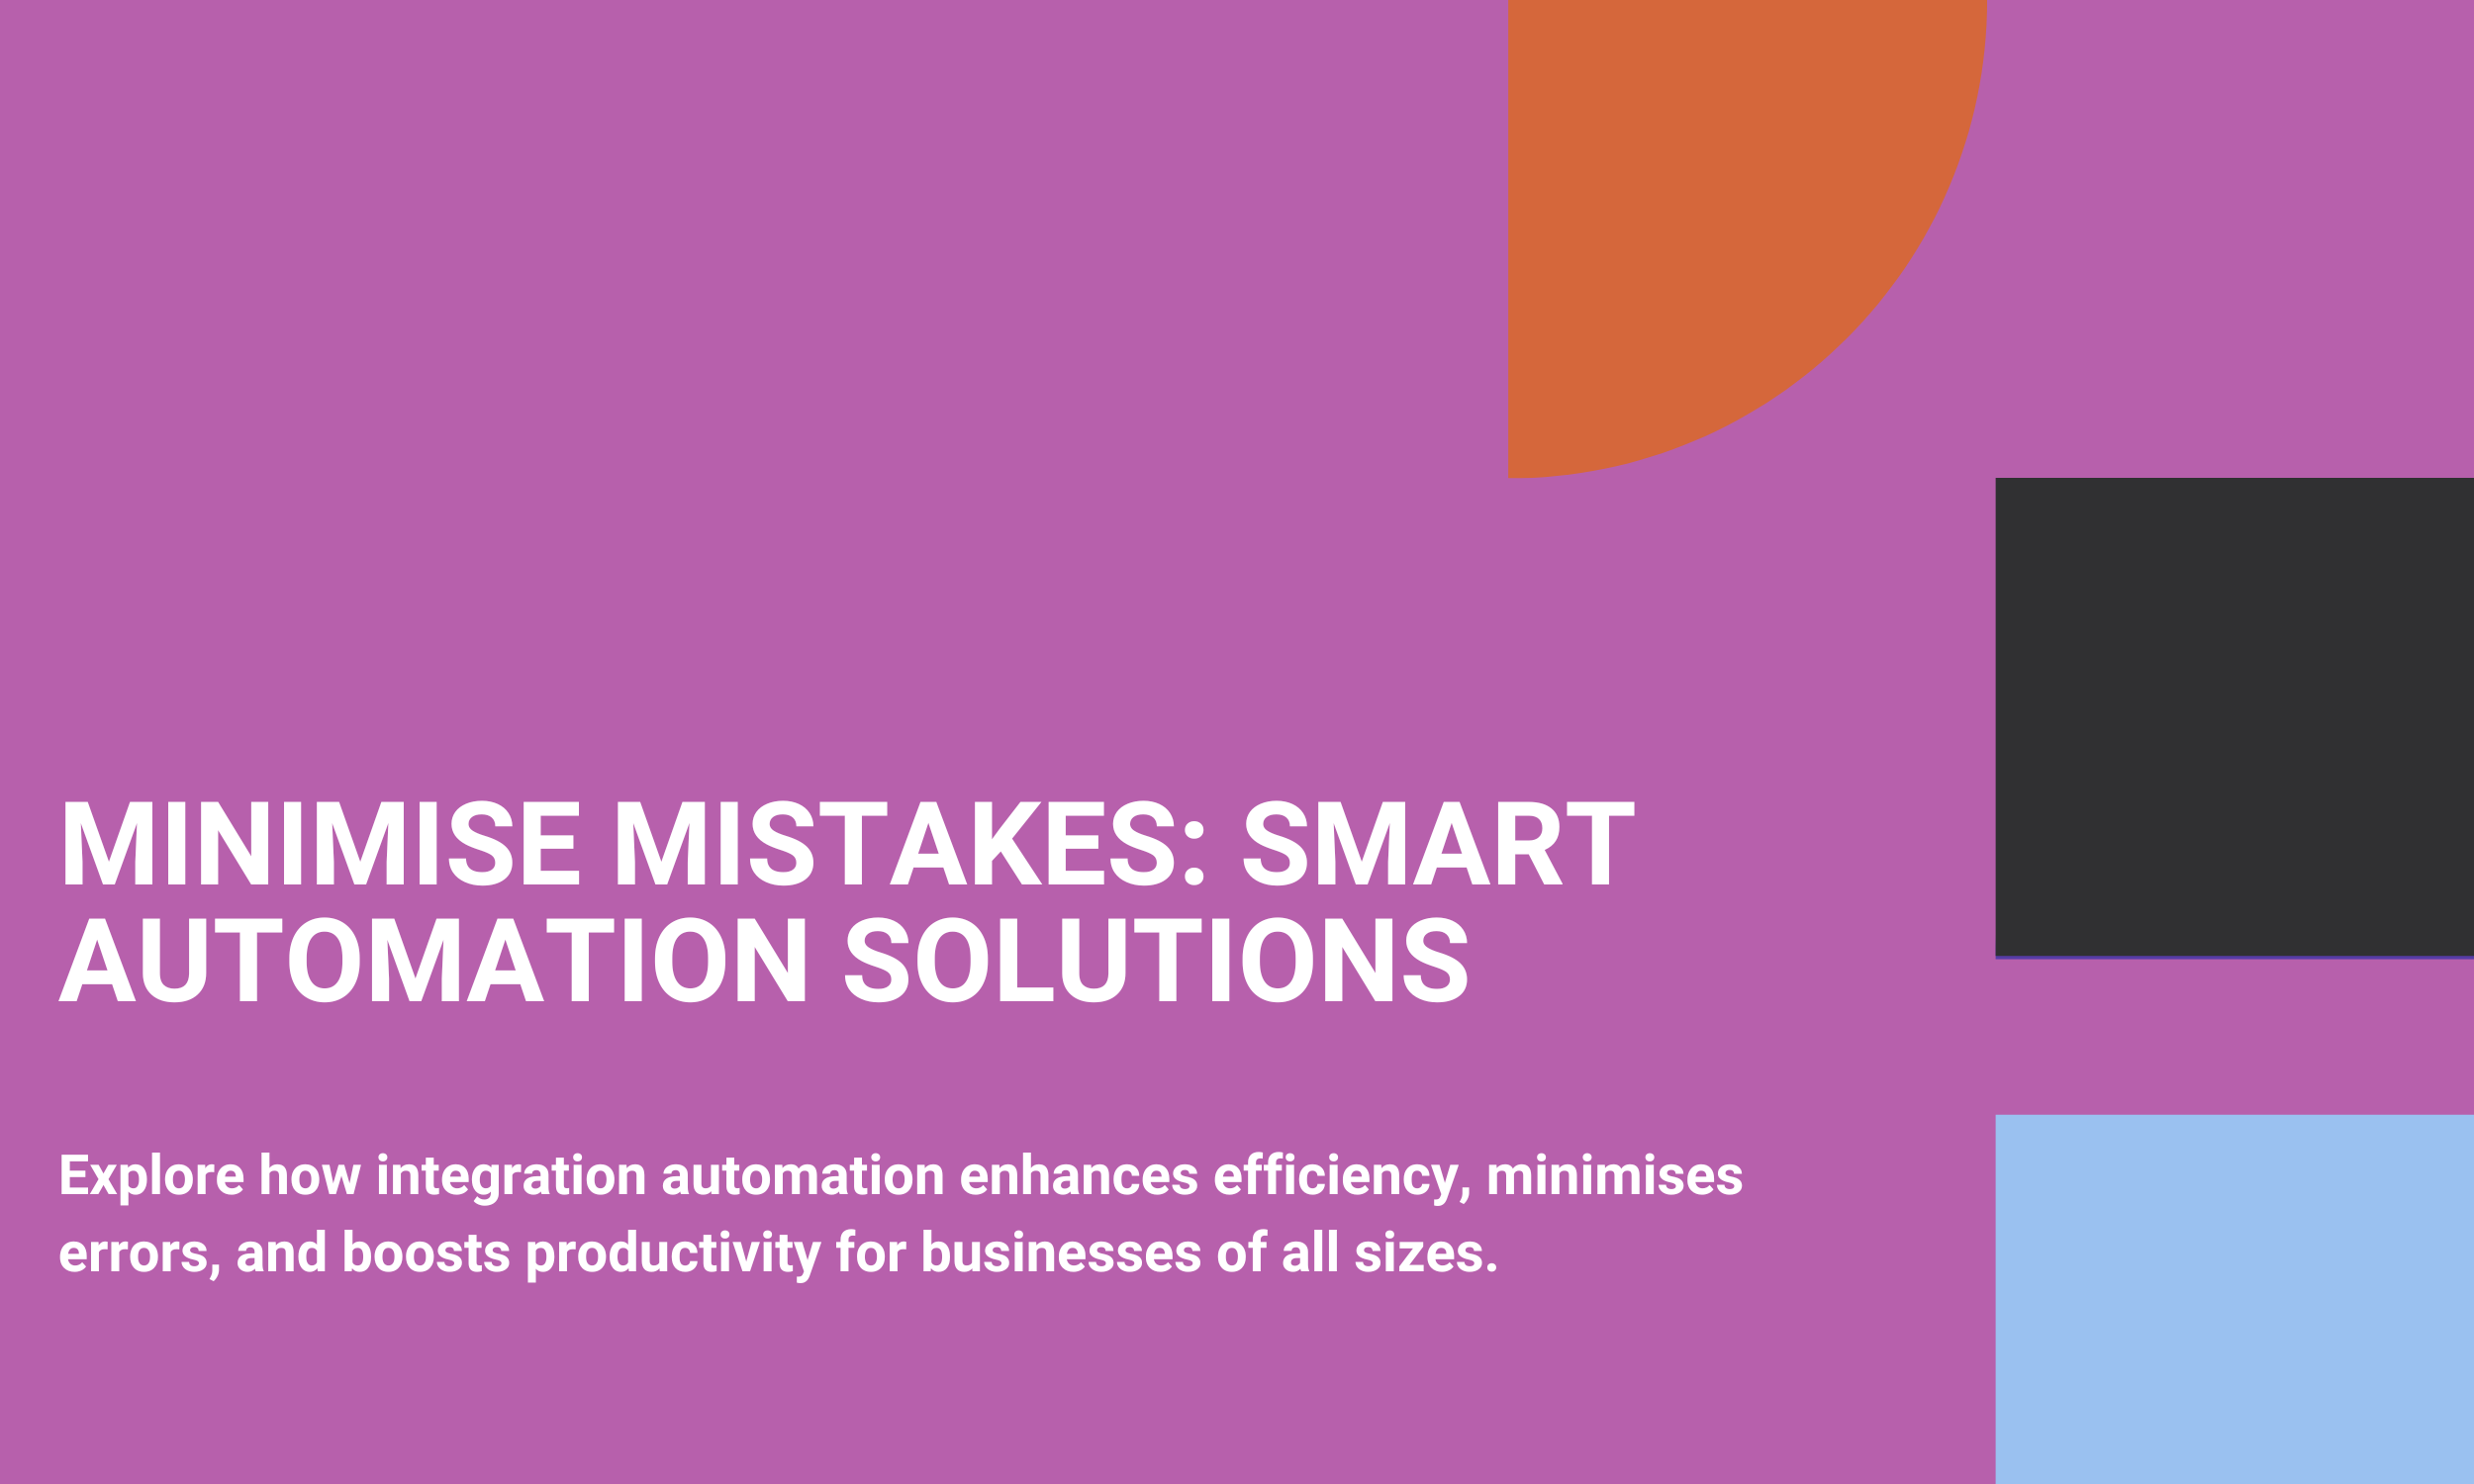 Minimise Mistakes: Smart Automation Solutions